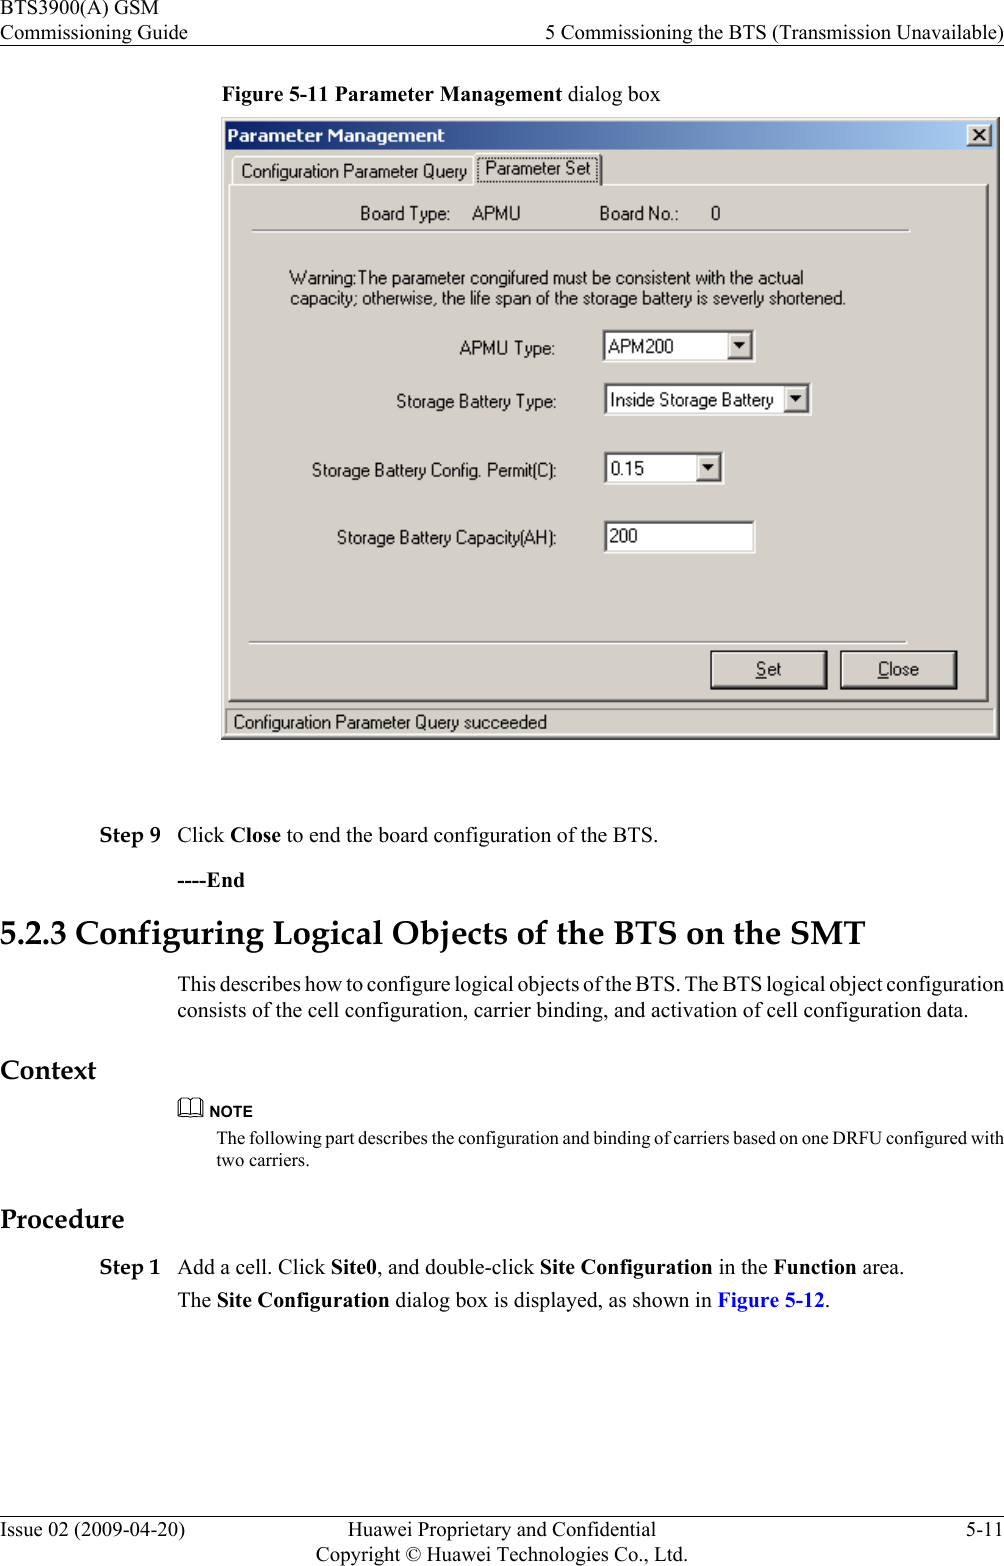 Figure 5-11 Parameter Management dialog box Step 9 Click Close to end the board configuration of the BTS.----End5.2.3 Configuring Logical Objects of the BTS on the SMTThis describes how to configure logical objects of the BTS. The BTS logical object configurationconsists of the cell configuration, carrier binding, and activation of cell configuration data.ContextNOTEThe following part describes the configuration and binding of carriers based on one DRFU configured withtwo carriers.ProcedureStep 1 Add a cell. Click Site0, and double-click Site Configuration in the Function area.The Site Configuration dialog box is displayed, as shown in Figure 5-12.BTS3900(A) GSMCommissioning Guide 5 Commissioning the BTS (Transmission Unavailable)Issue 02 (2009-04-20) Huawei Proprietary and ConfidentialCopyright © Huawei Technologies Co., Ltd.5-11